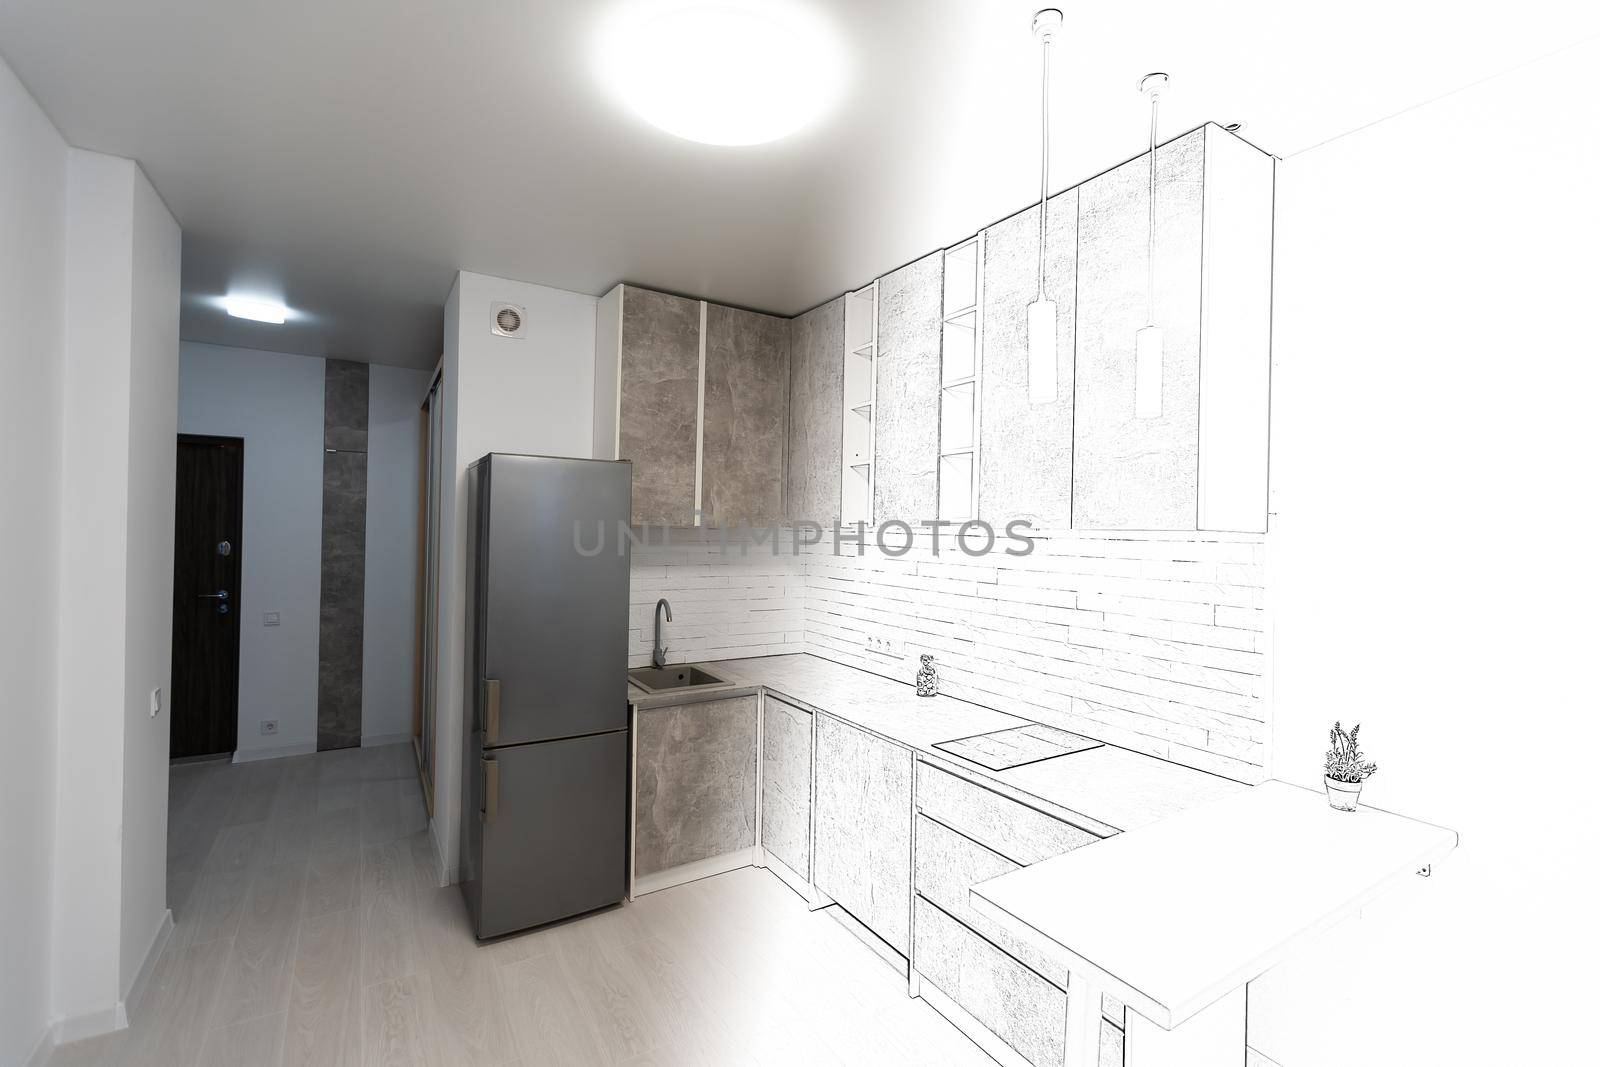 plan illustration and room berfore renovation concept drawing.